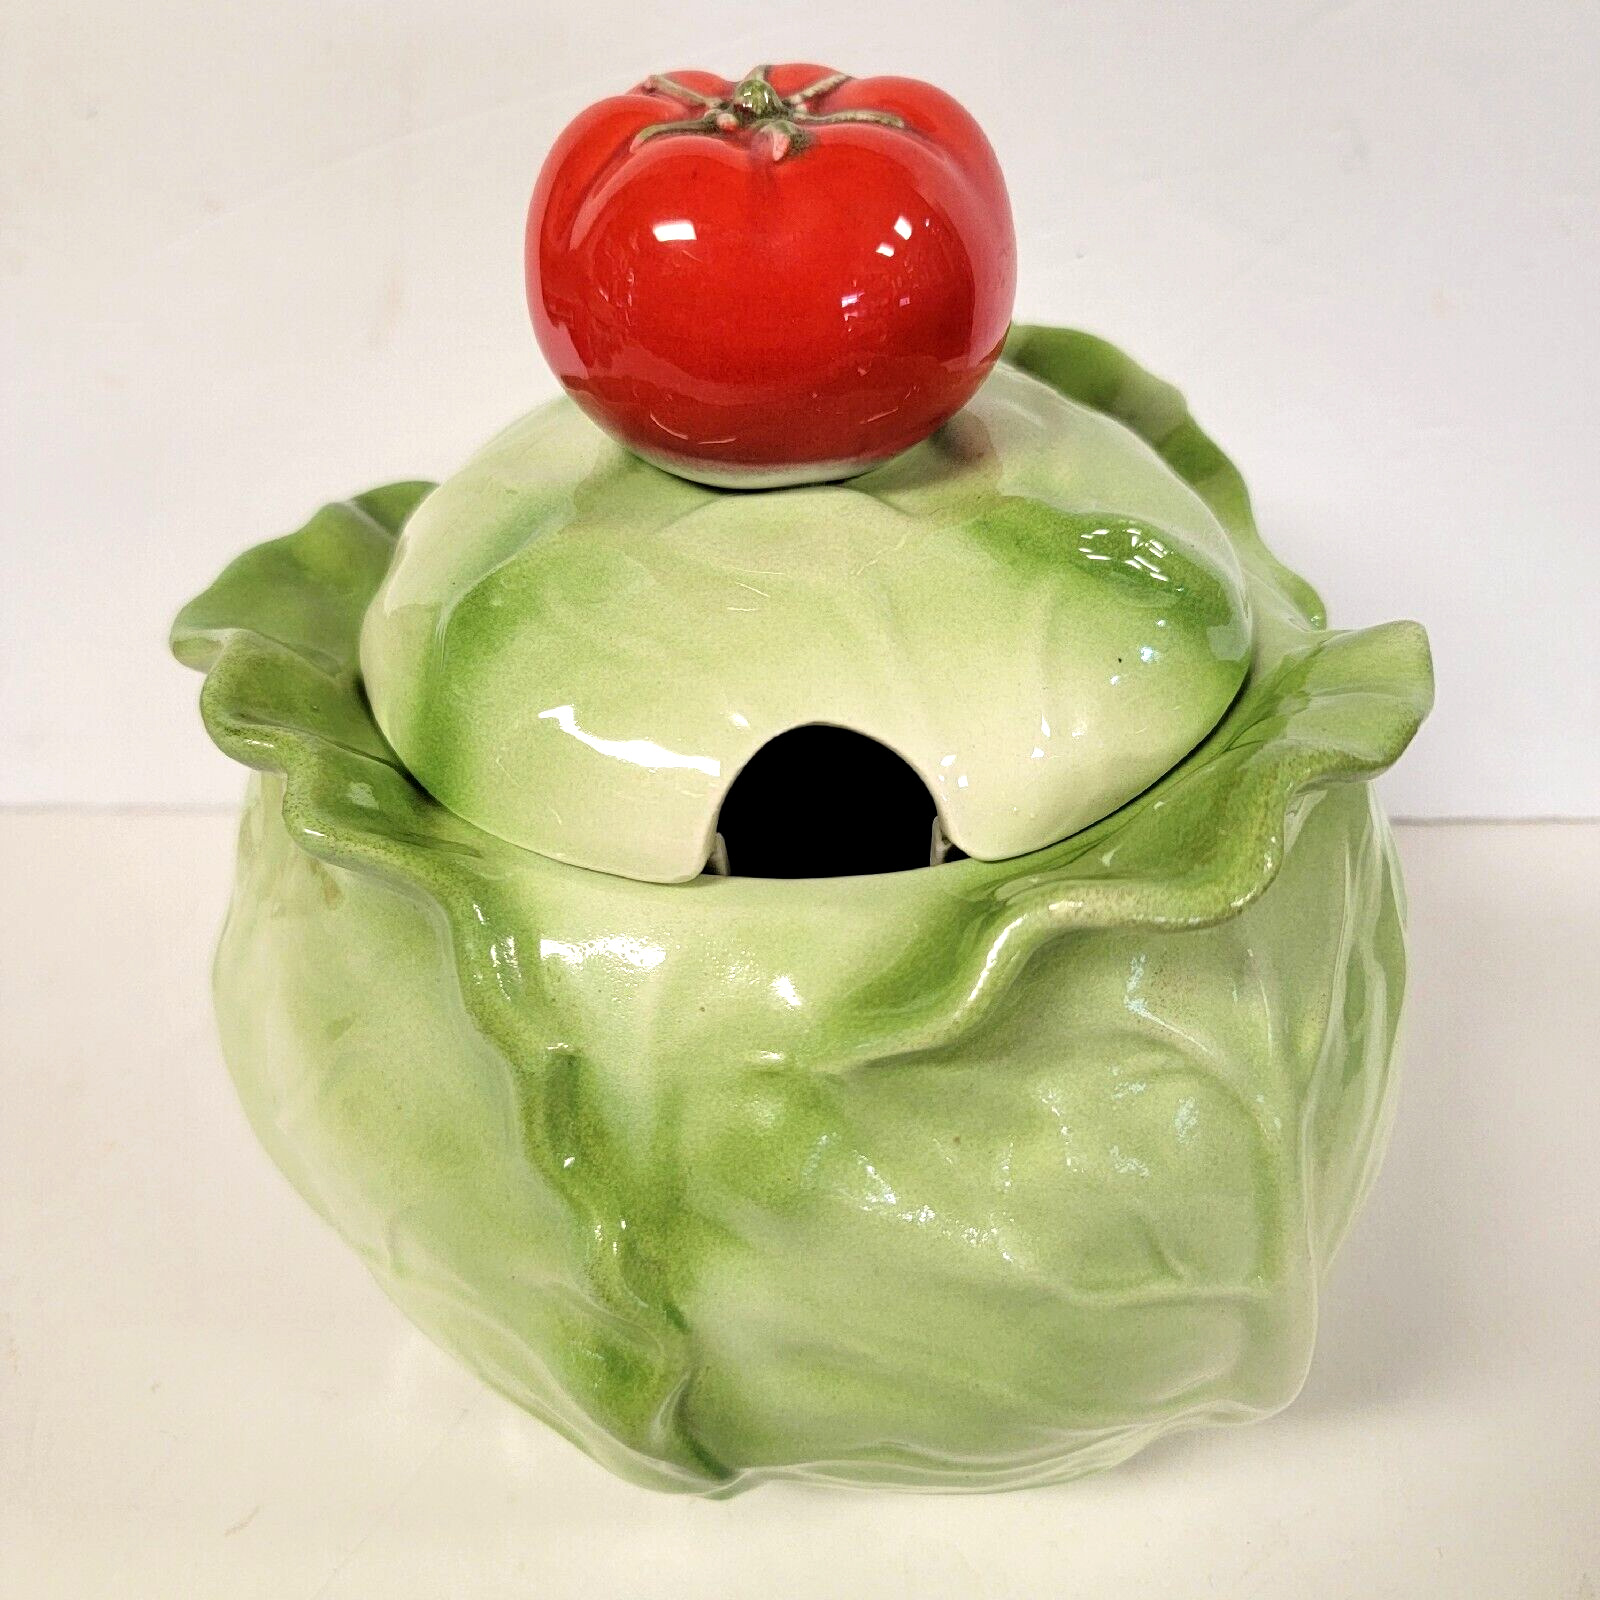 VTG METLOX Cabbage Head Soup Tureen With Tomato Lid Poppytrail Pottery